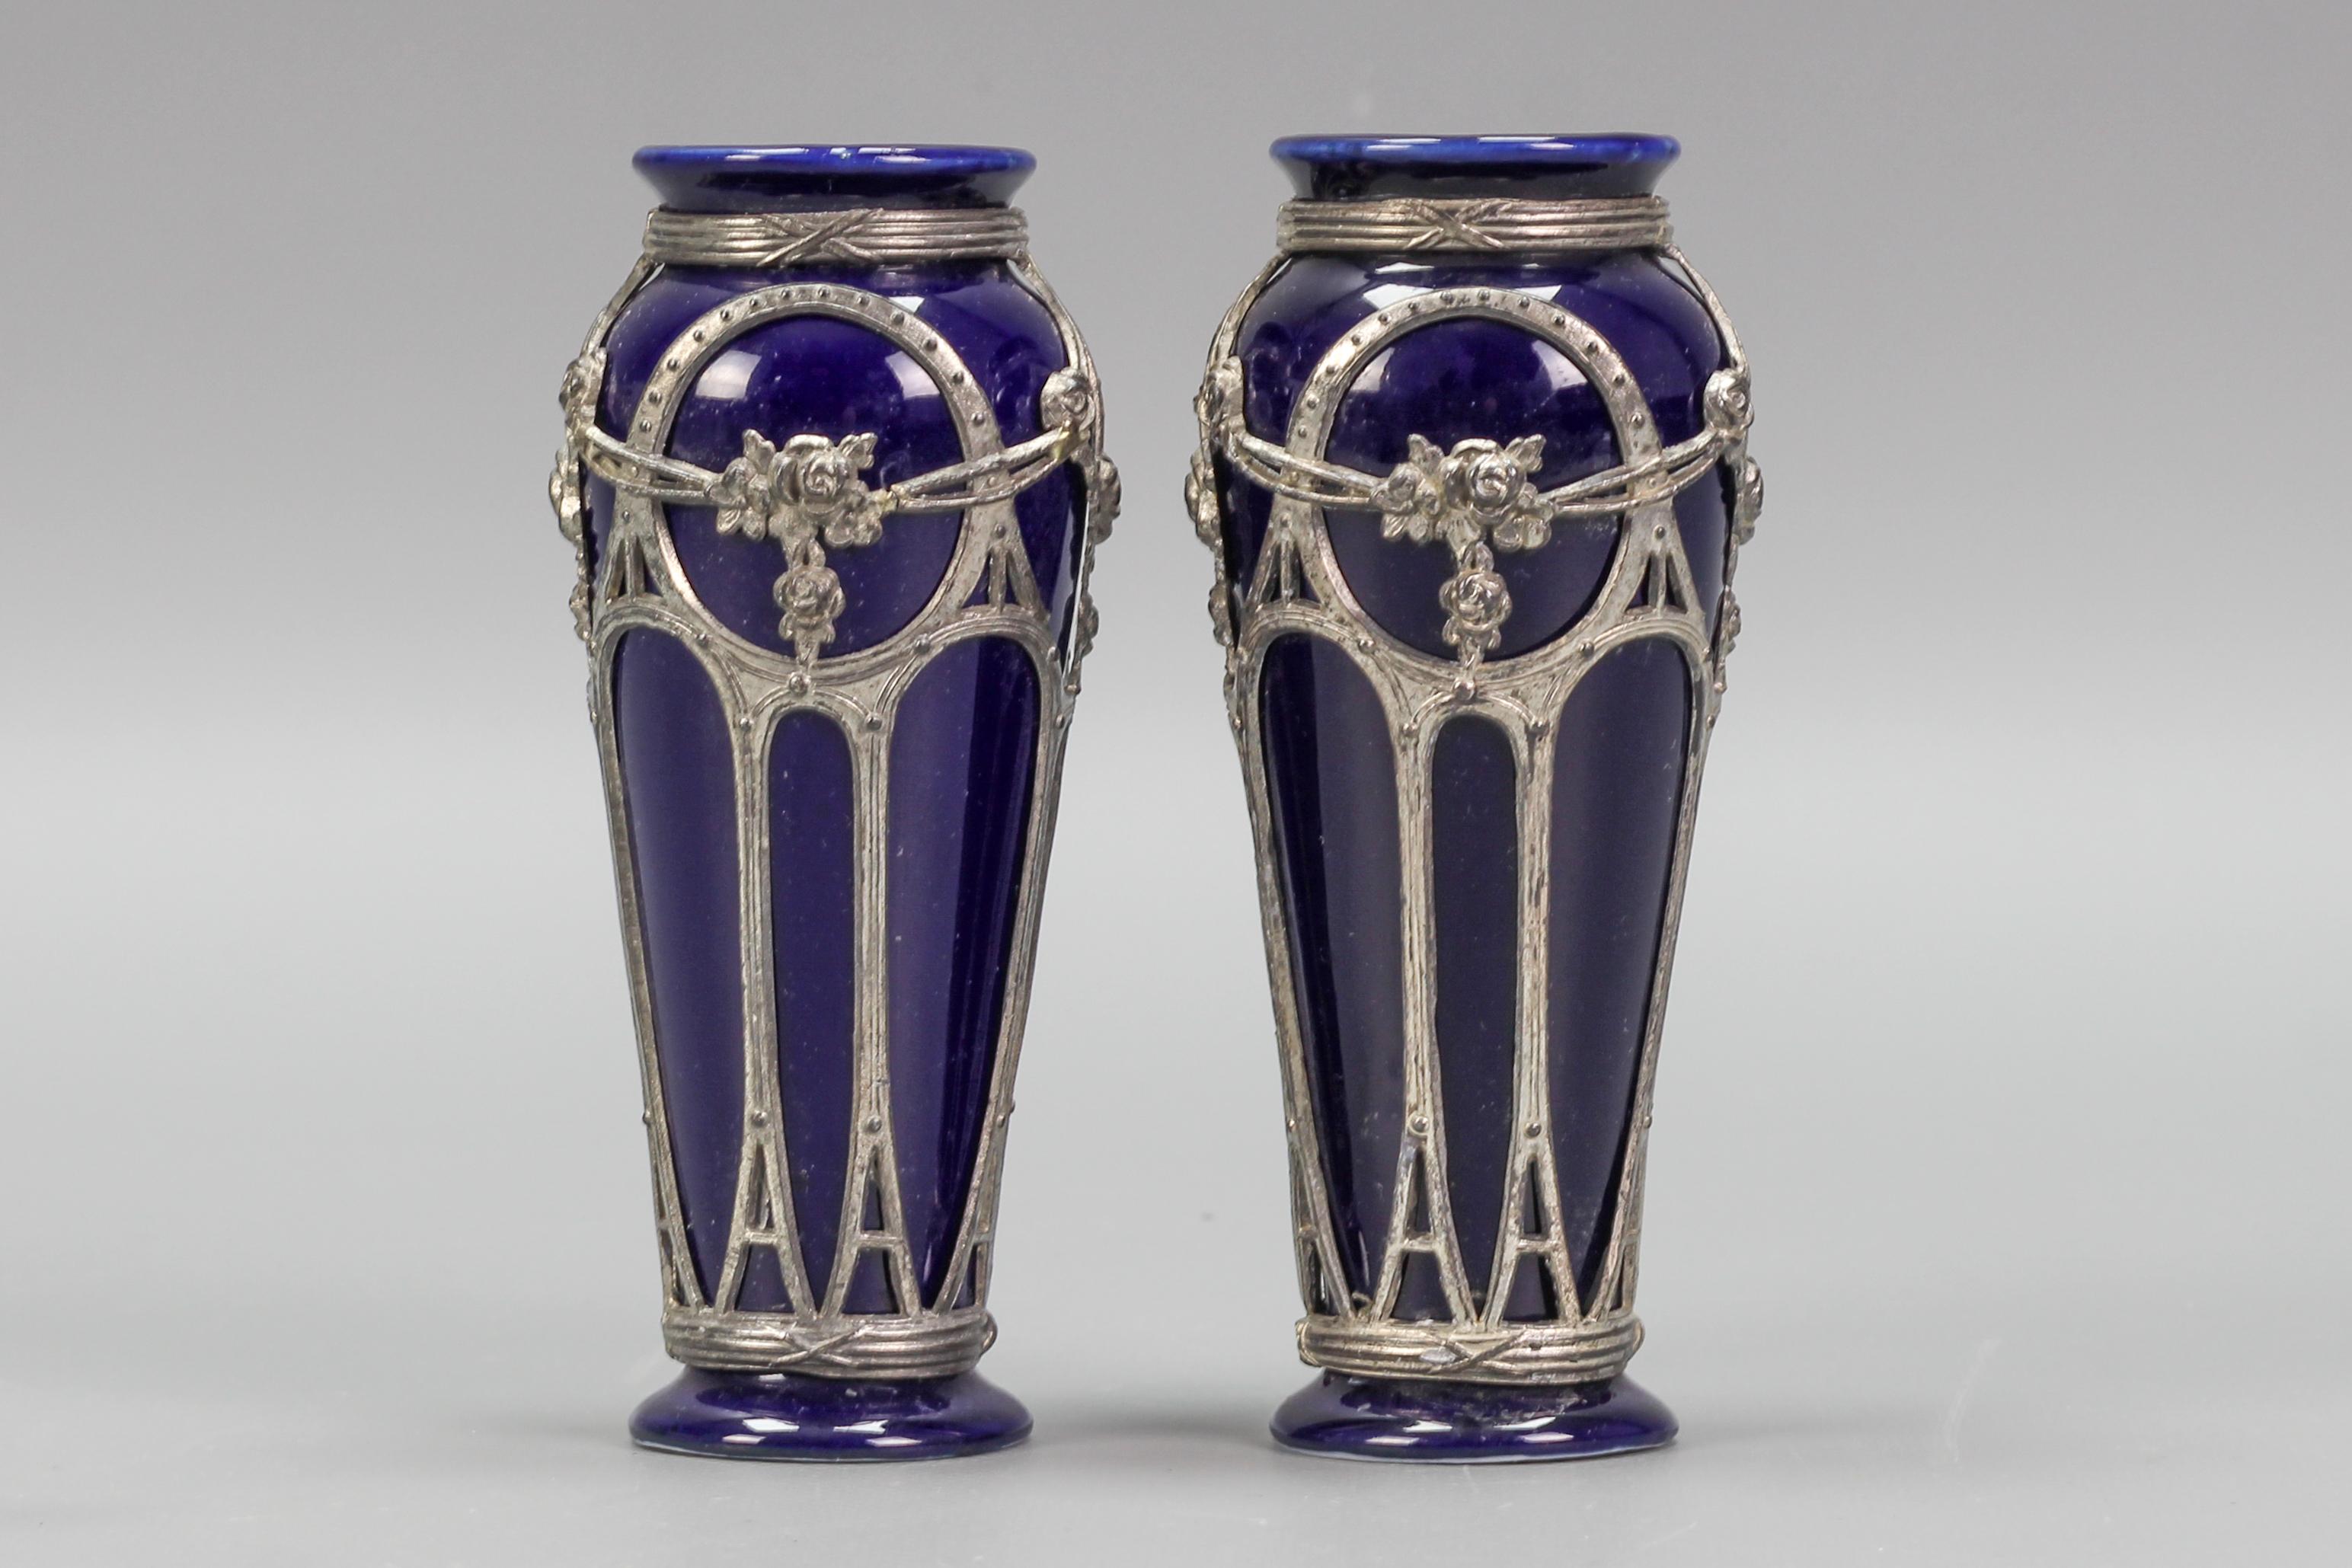 An adorable pair of small Art Nouveau period vases. These beautiful vases are made of glazed ceramic in indigo blue color and adorned with decorative pewter mountings. Germany, circa 1910.
Dimensions: height: 12.5 cm / 4.92 in; diameter: 5 cm /